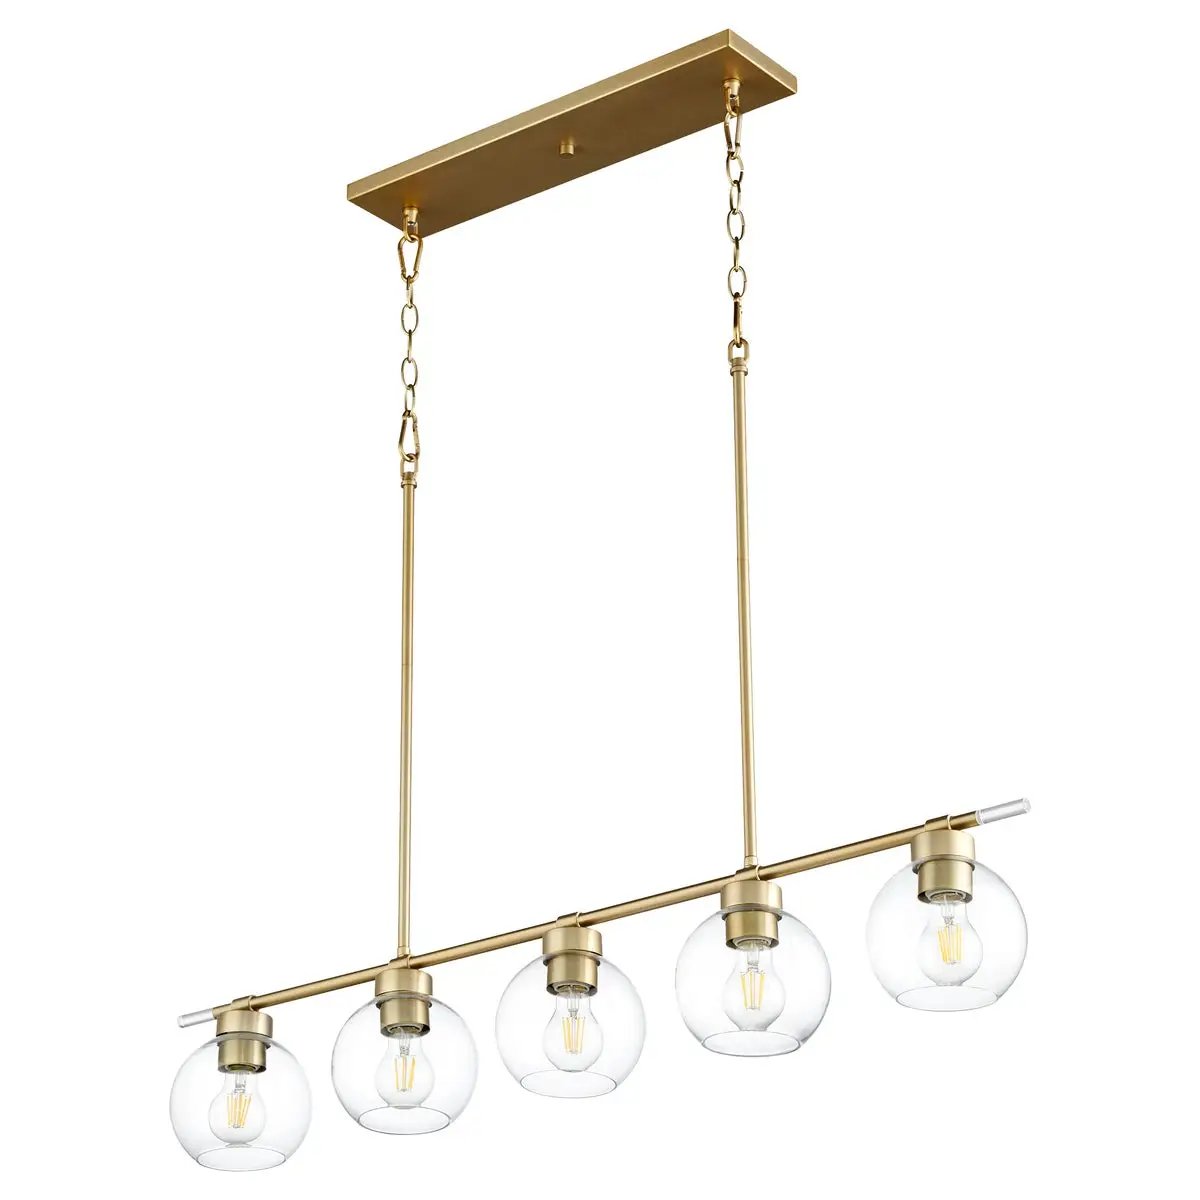 Transitional Linear Chandelier with clear glass globes and aged brass finish, 5 bulbs, 100W, UL Listed, Damp Location, 6&quot;W x 7.25&quot;H x 41&quot;L.